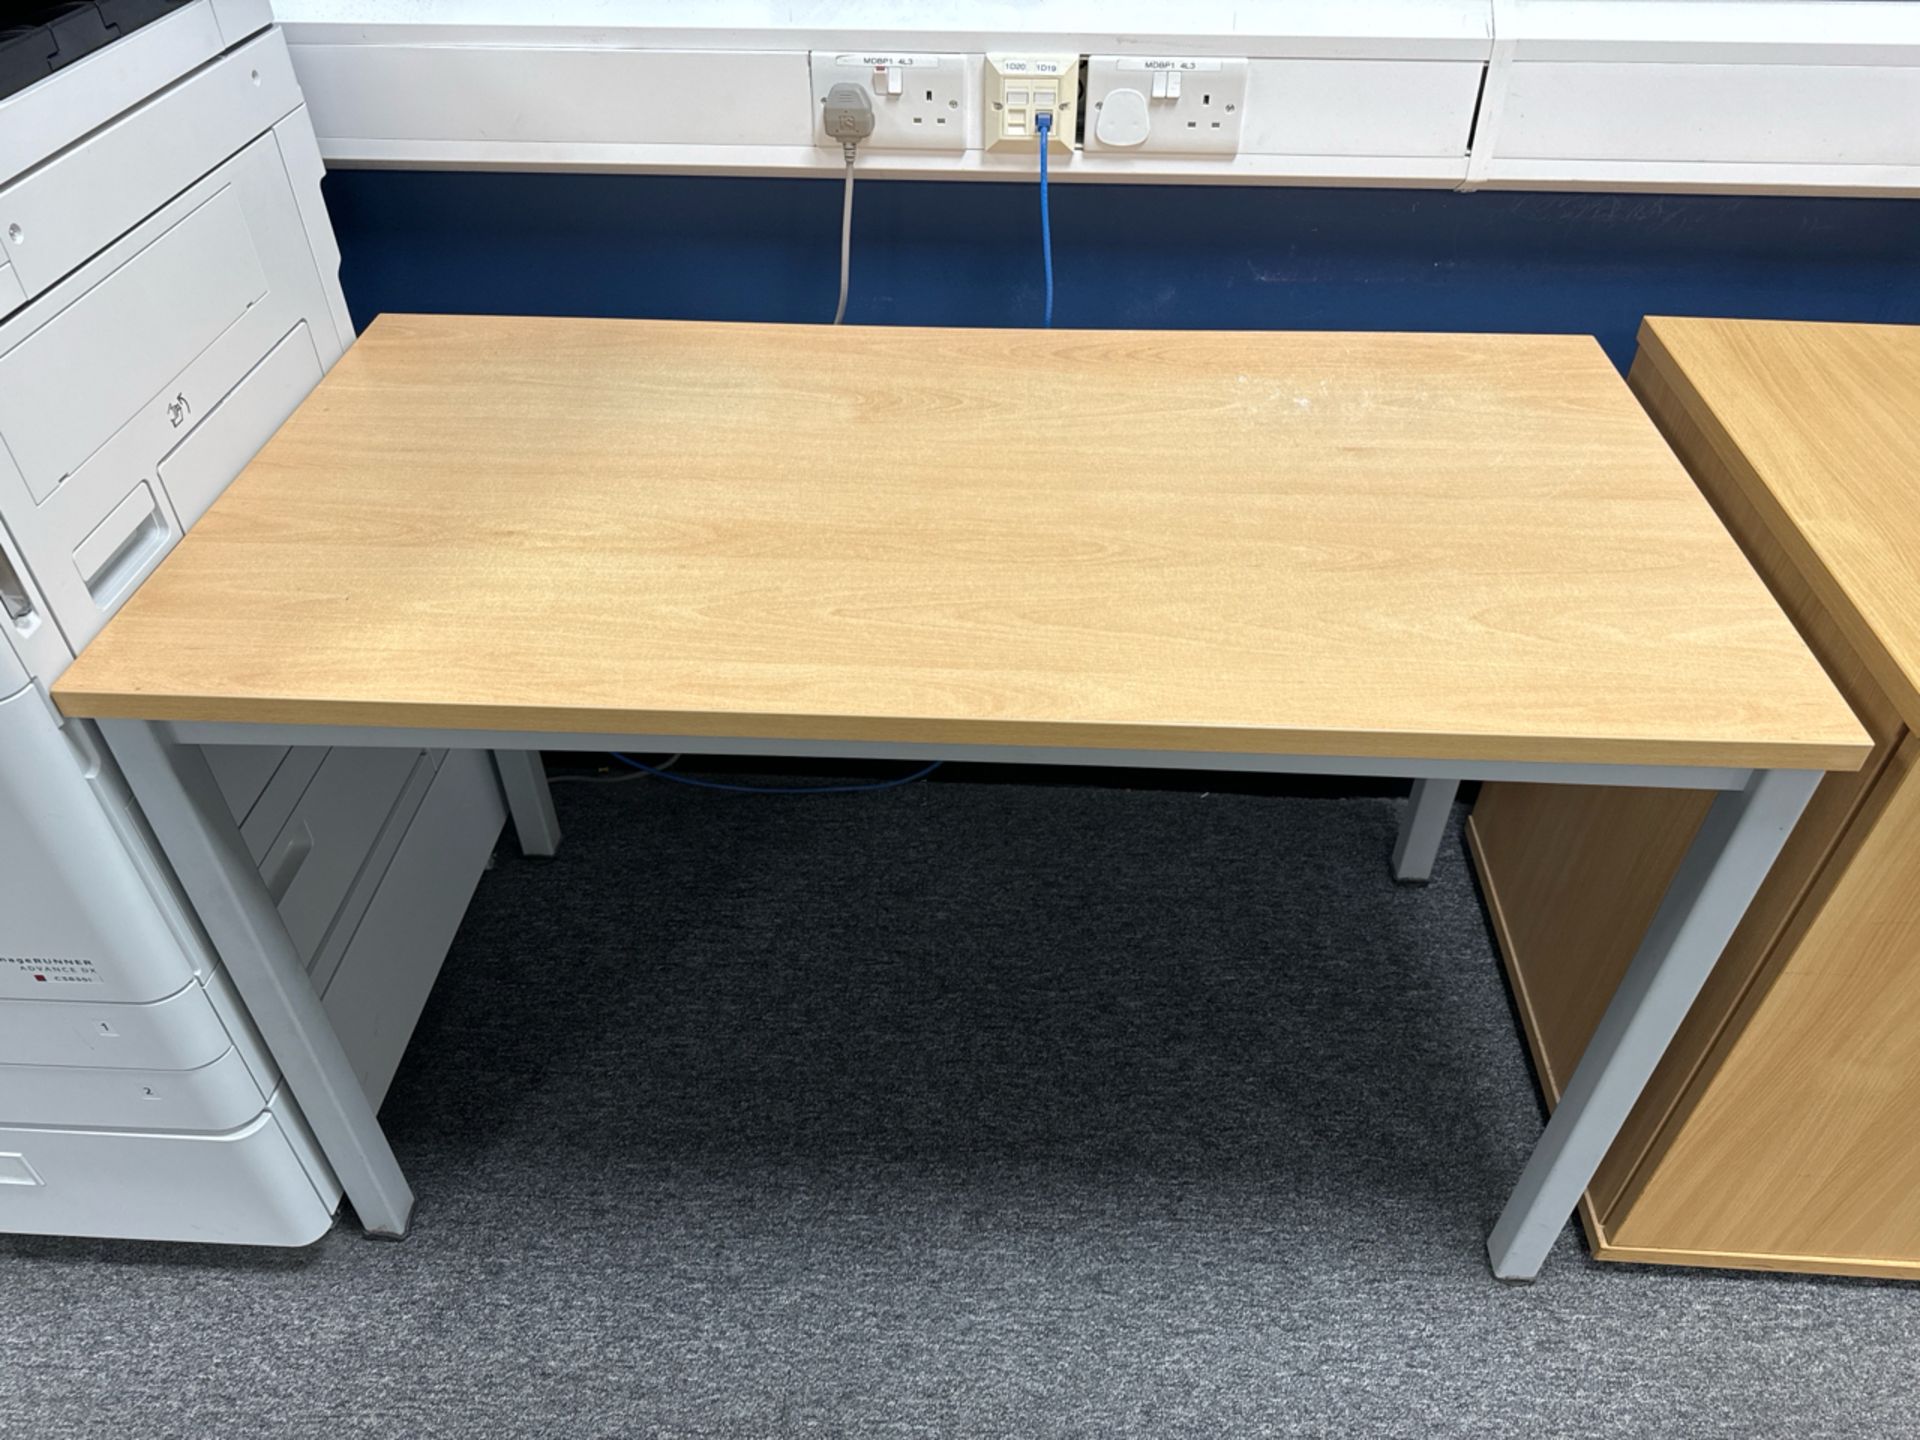 Wooden Office Desk With Metal Legs - Image 2 of 3